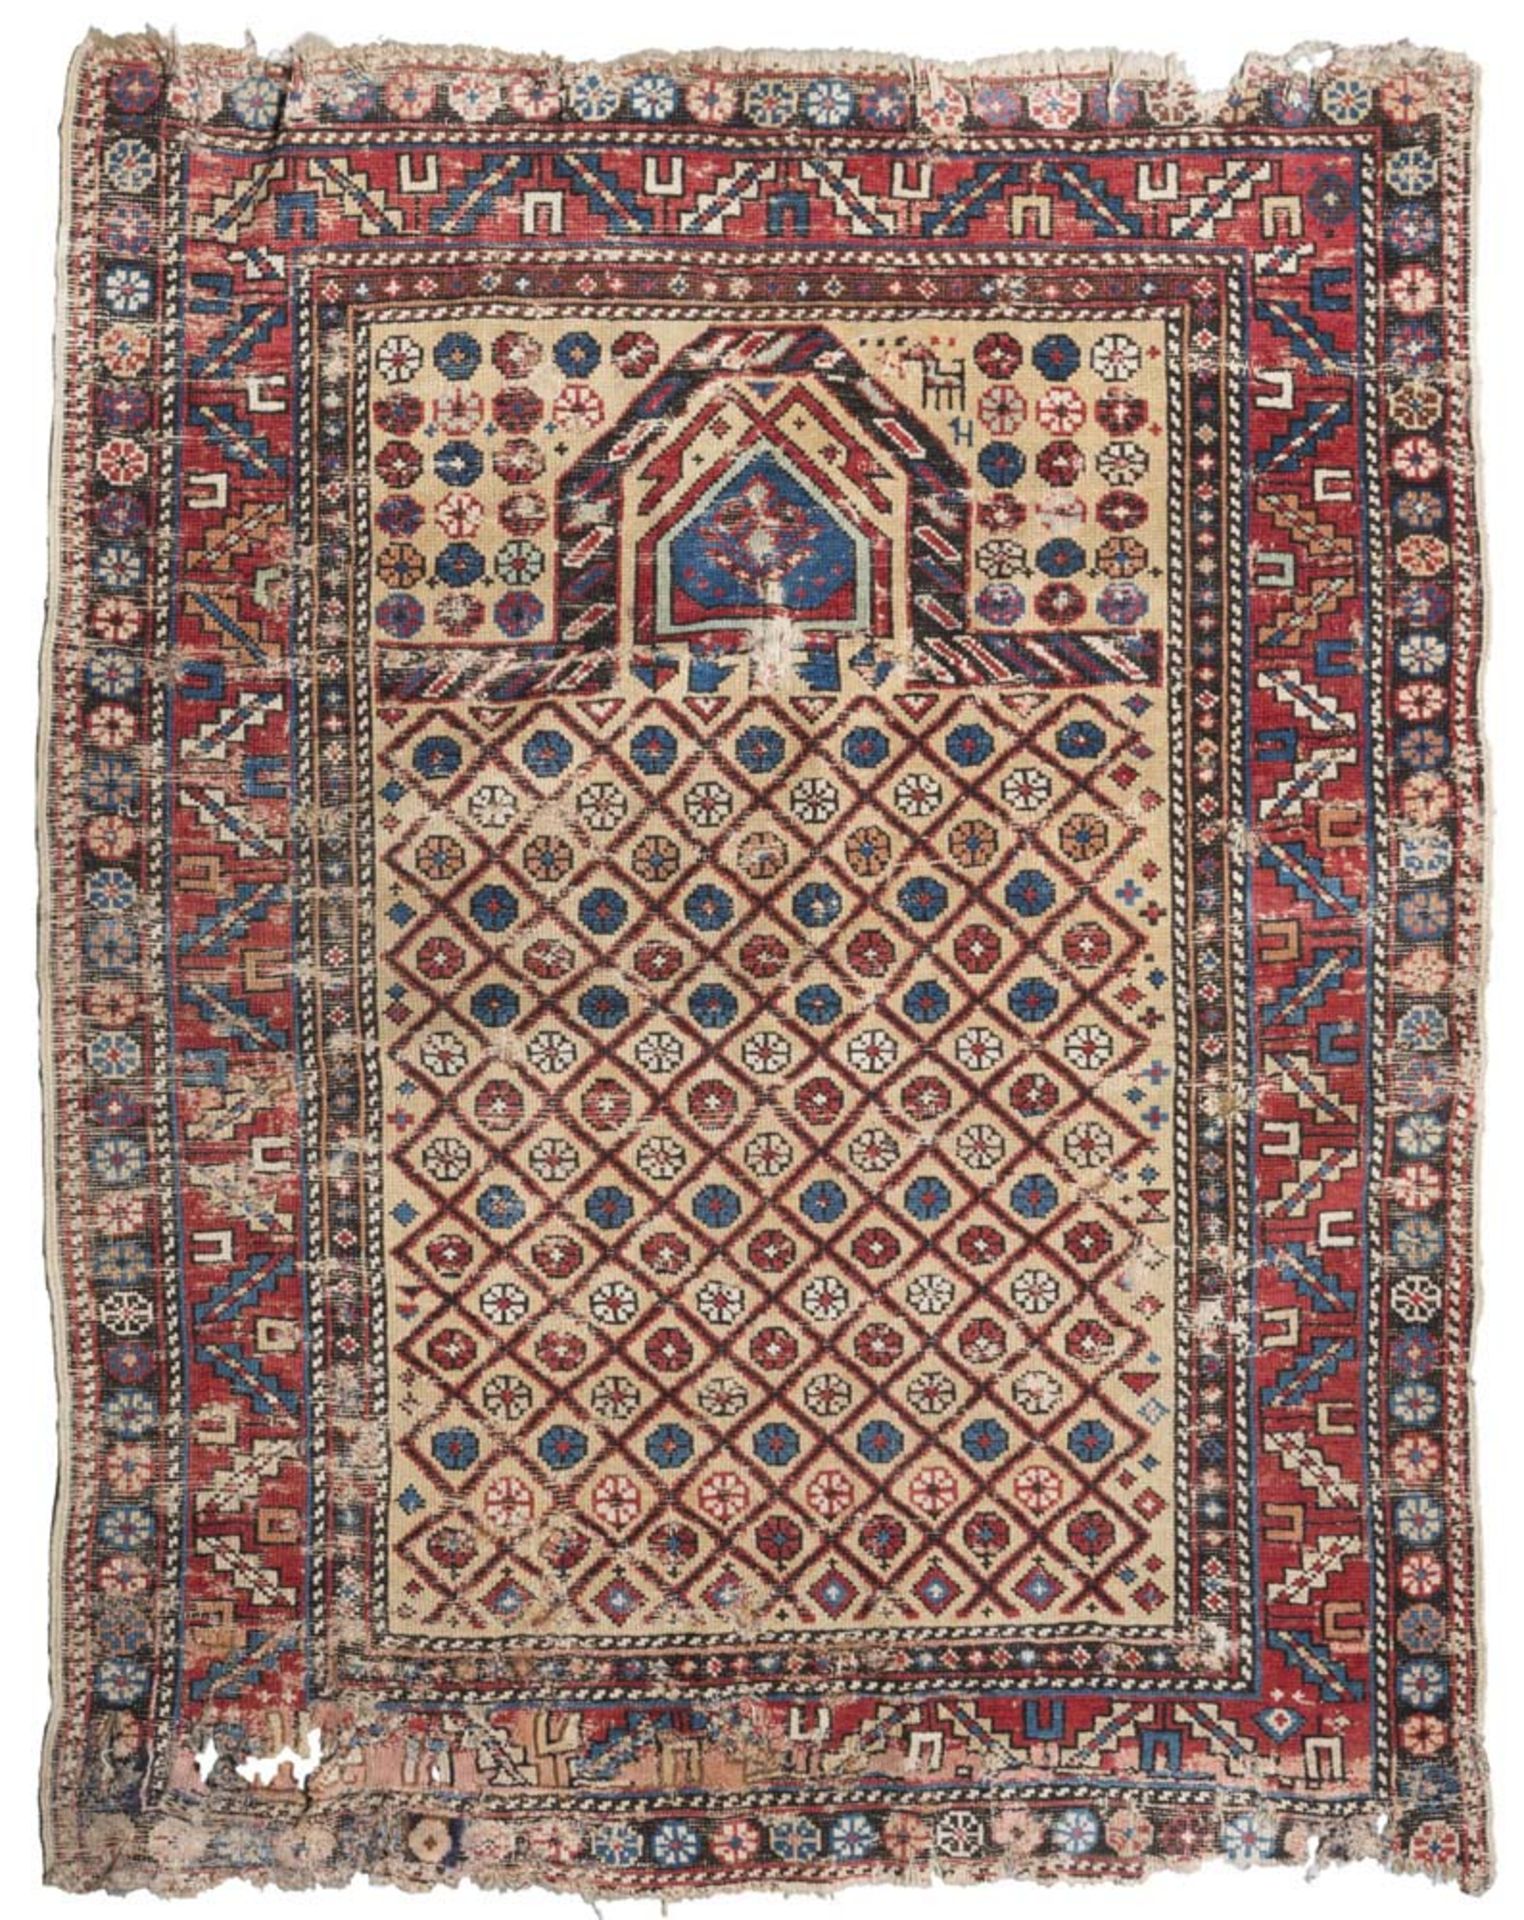 REMAINS OF SHIRWAN MARASALI CARPET, LATE 19TH CENTURY with flowers in the middle field with a yellow